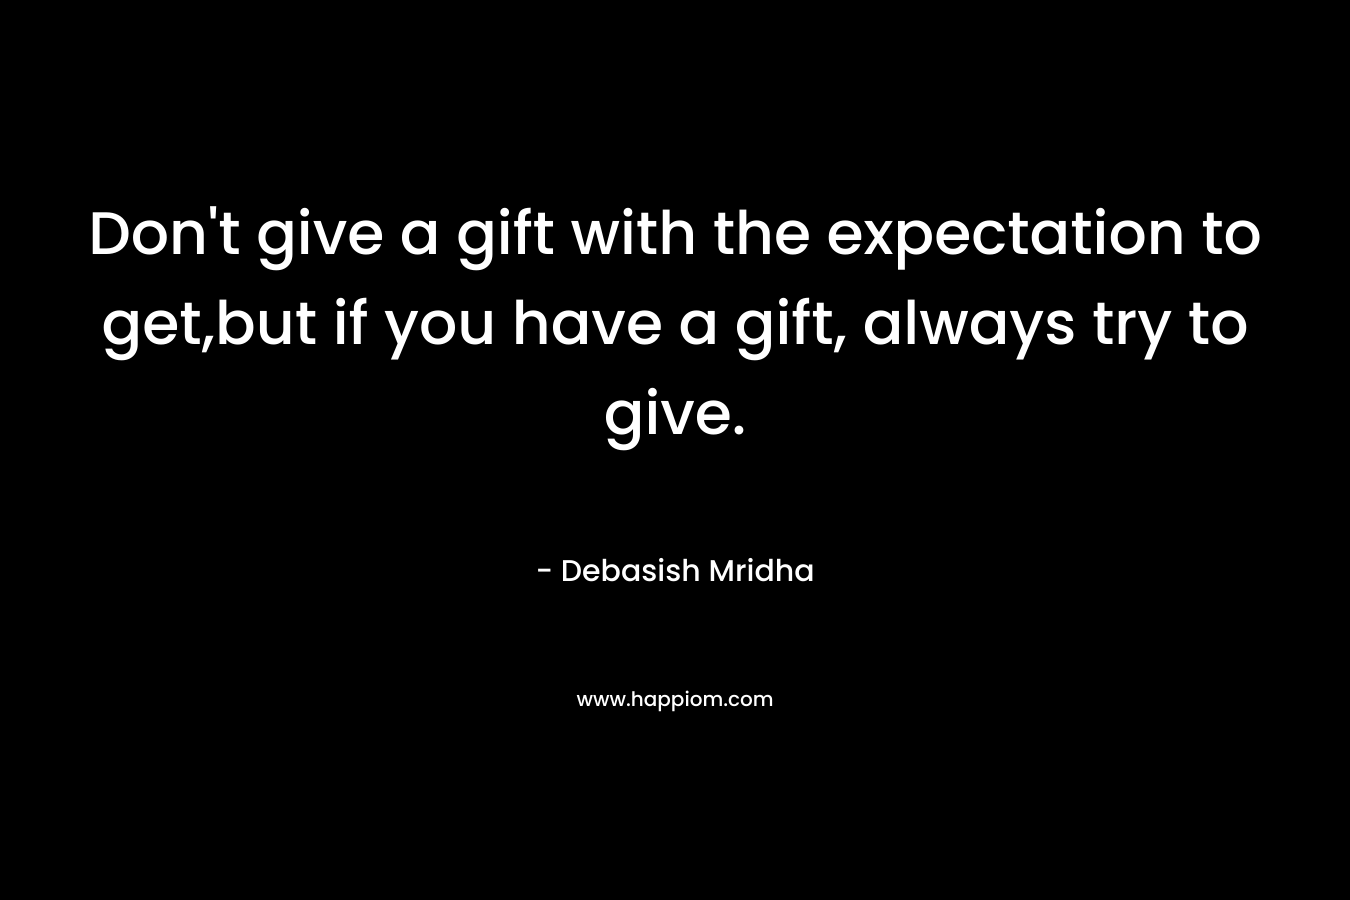 Don’t give a gift with the expectation to get,but if you have a gift, always try to give. – Debasish Mridha